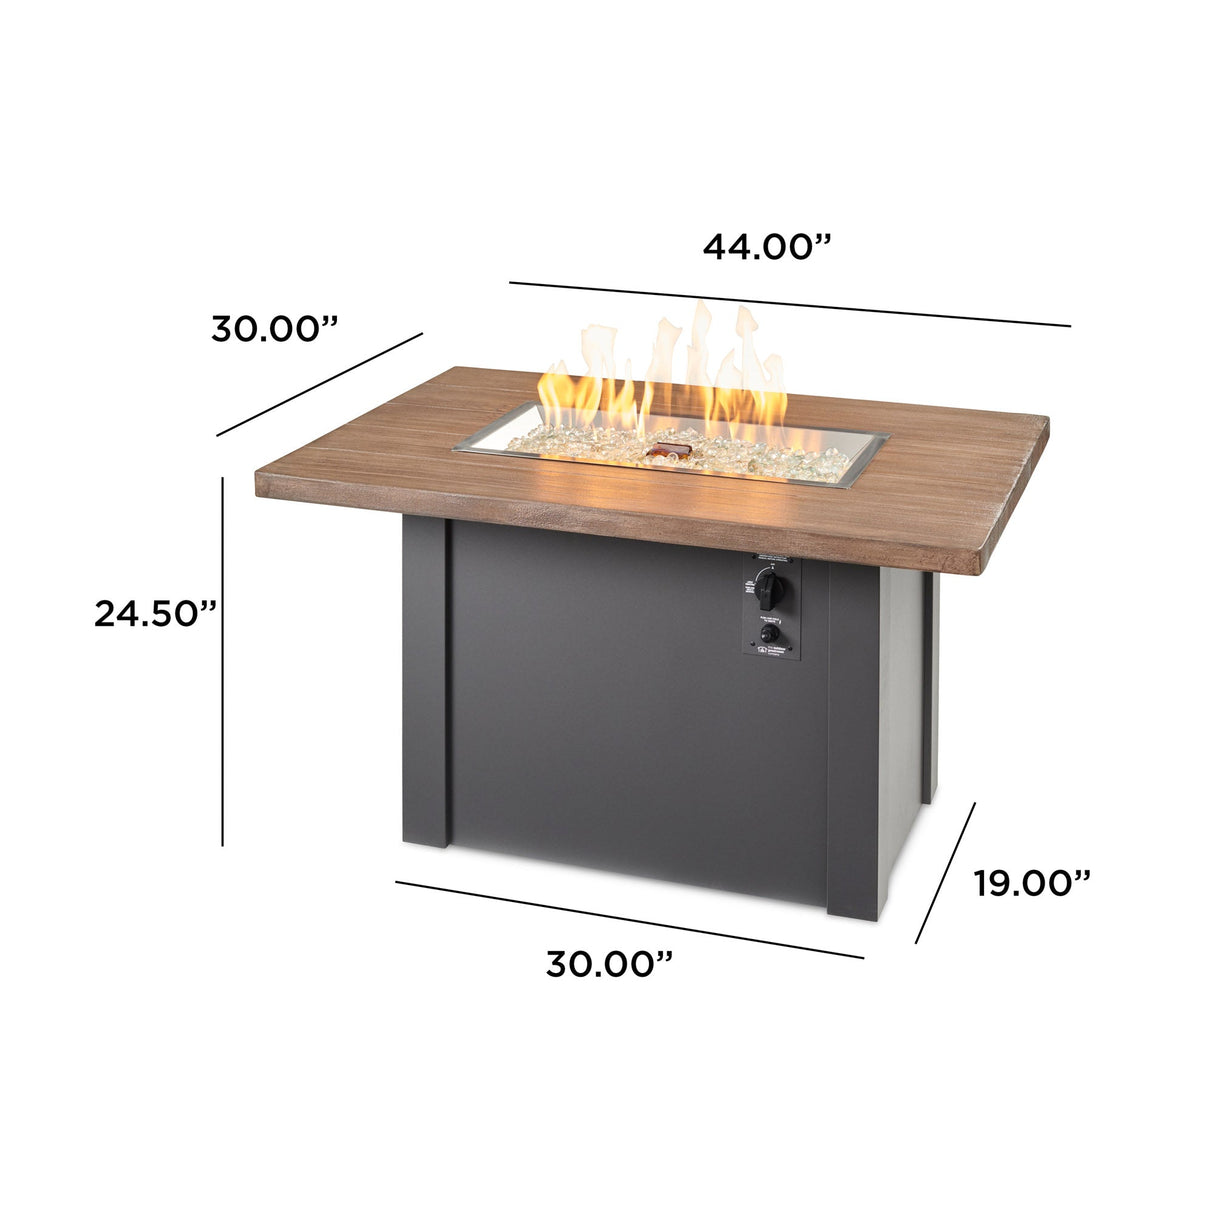 Dimensions overlaid on the Havenwood Rectangular Gas Fire Pit Table with a Driftwood top and Graphite Grey base